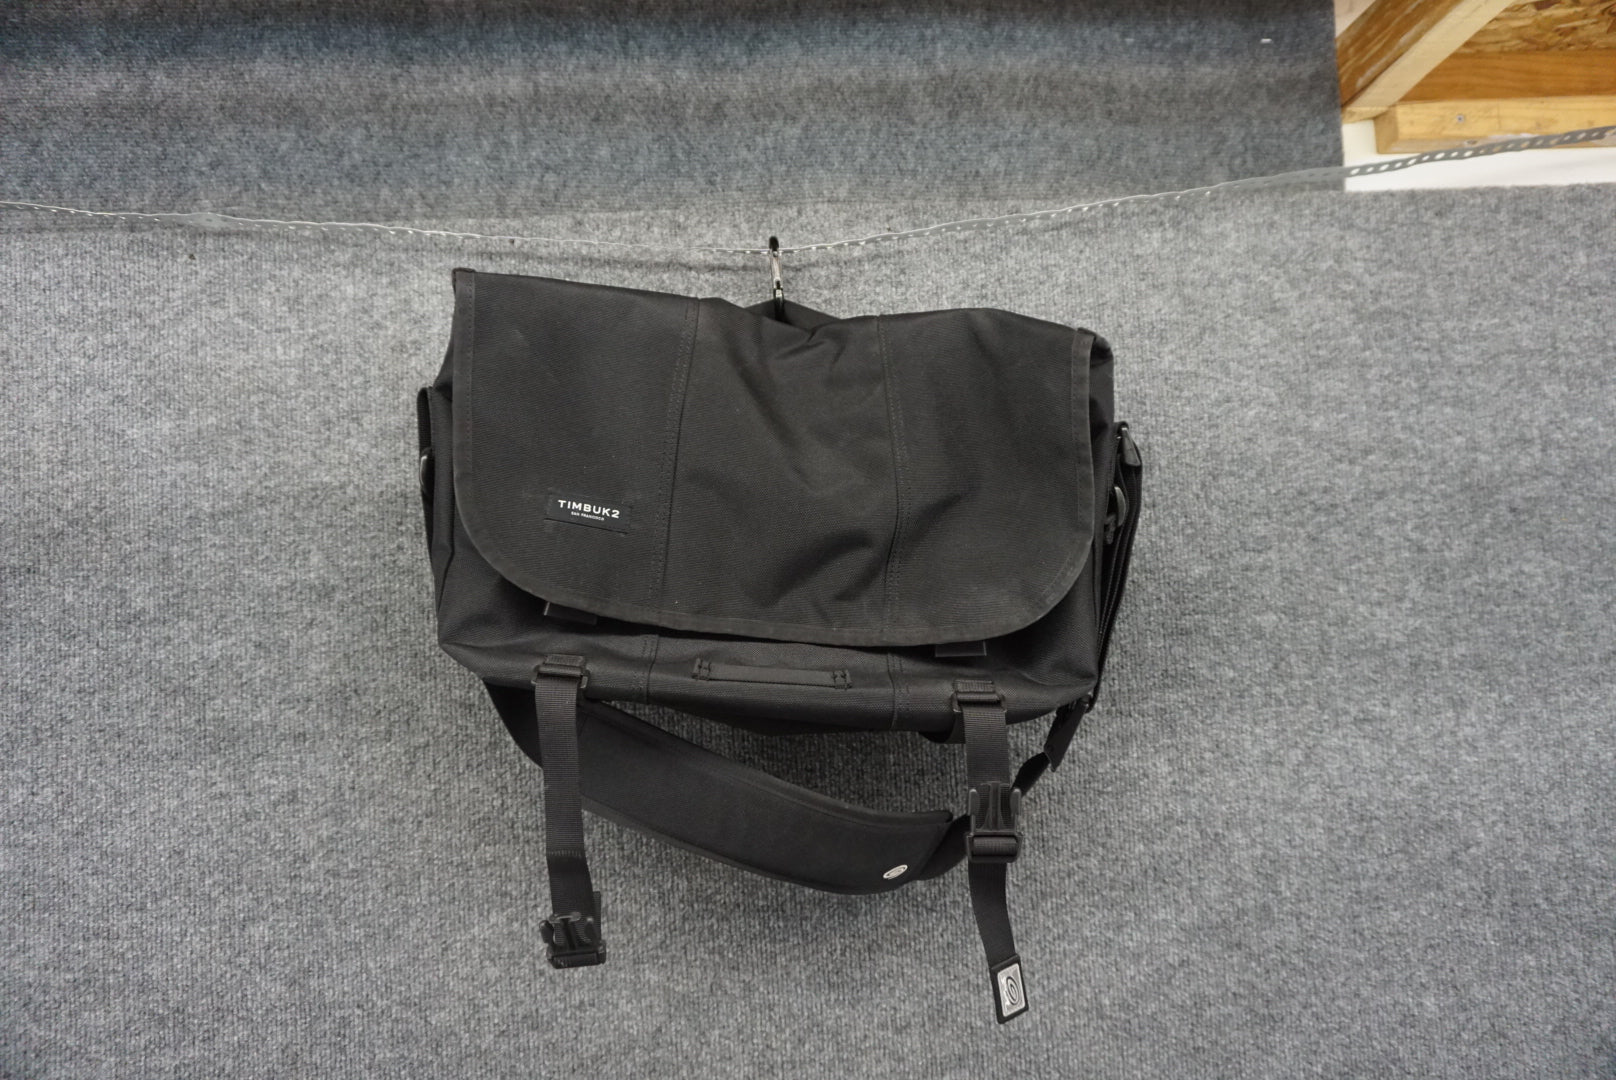 is currently offering select Timbuk2 Messenger Bags from